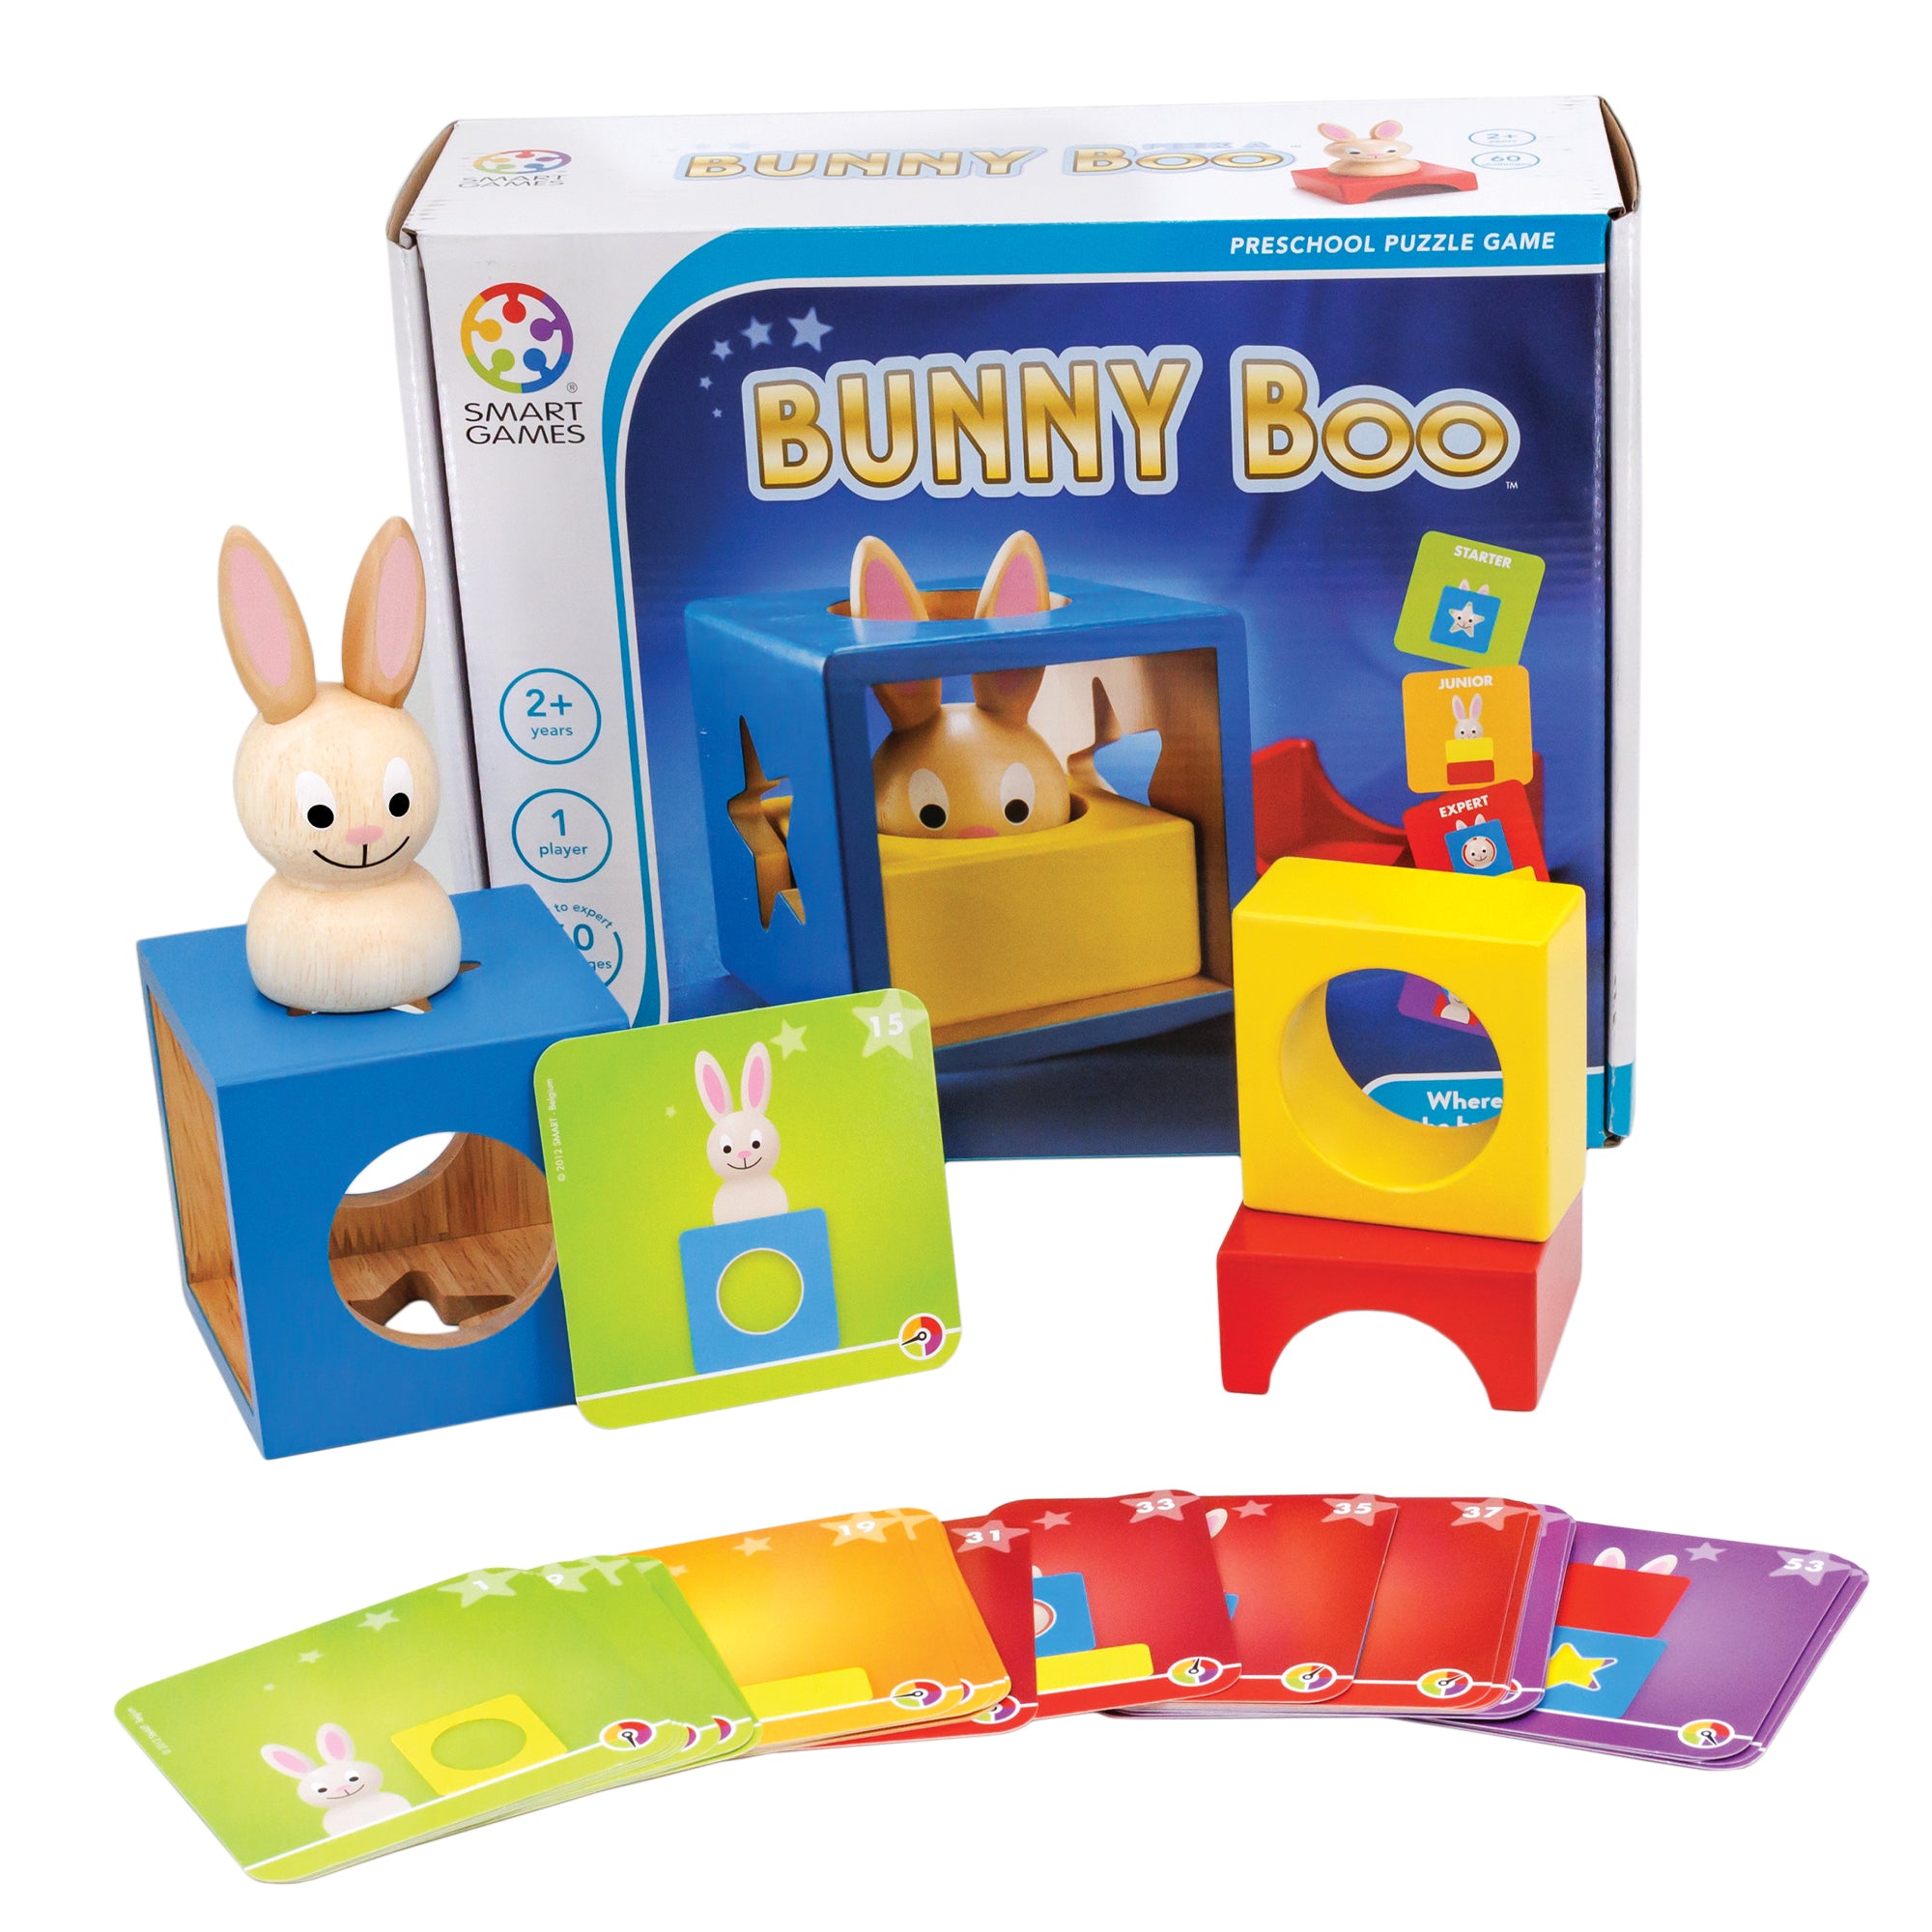 Bunny Boo game box with contents. In front of the box, is a hollow blue wood block with shapes cut out on the sides with a wooden bunny piece on top and a challenge card propped up against it. To the right are a yellow piece with a hollow circle through the middle and a red piece that shows a half circle piece cut out of the middle. There are challenge cards fanned out along the bottom in many colors.